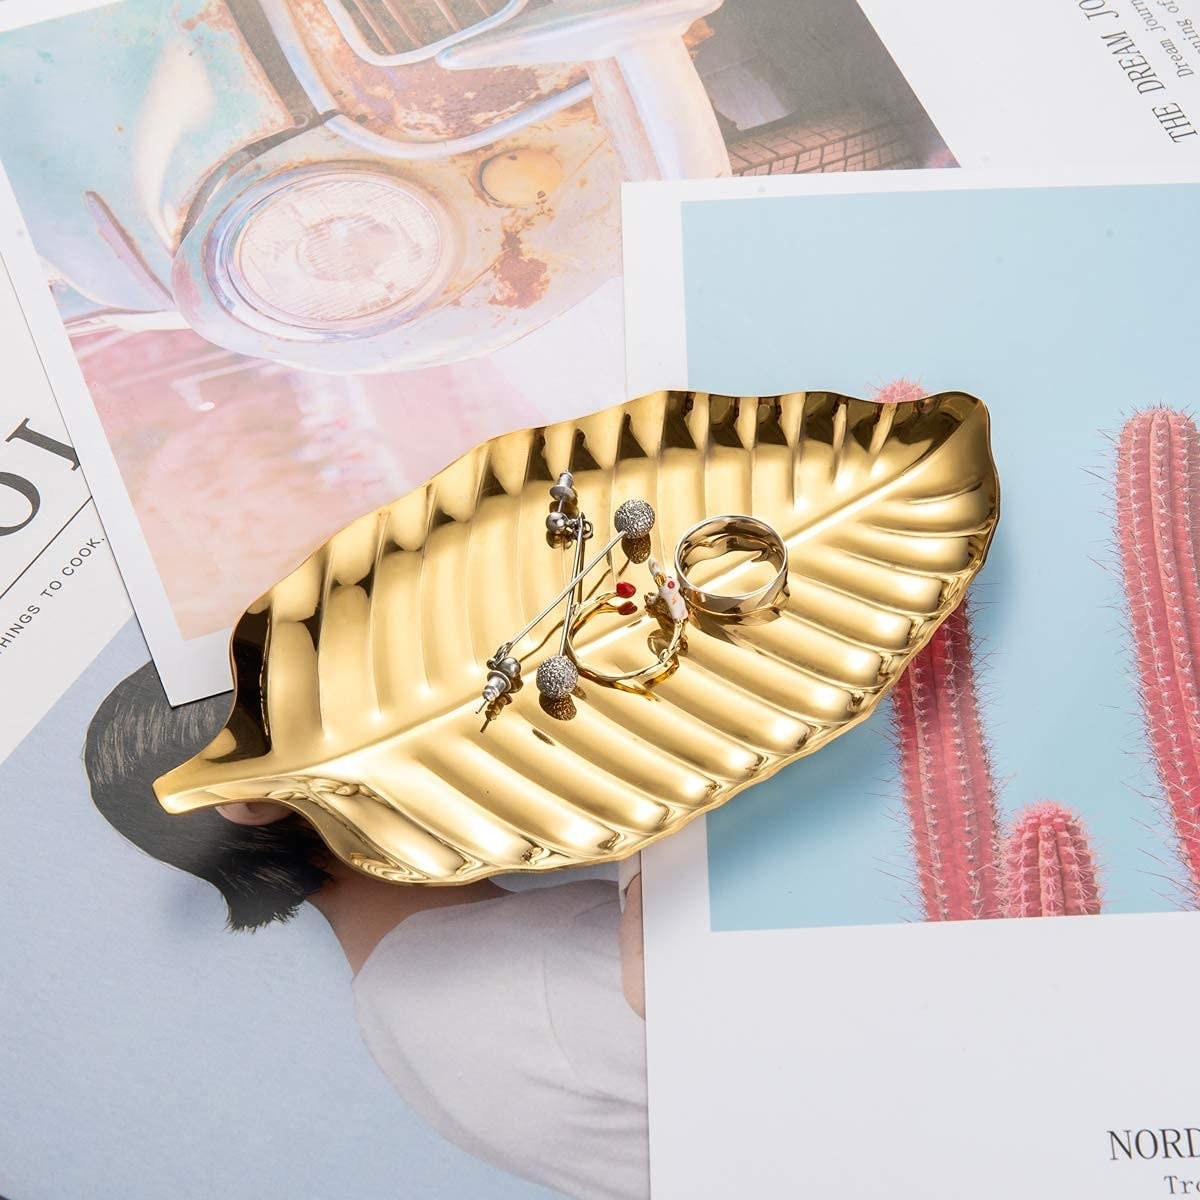 The gold leaf tray holding some earrings and rings on a stack of magazine pages